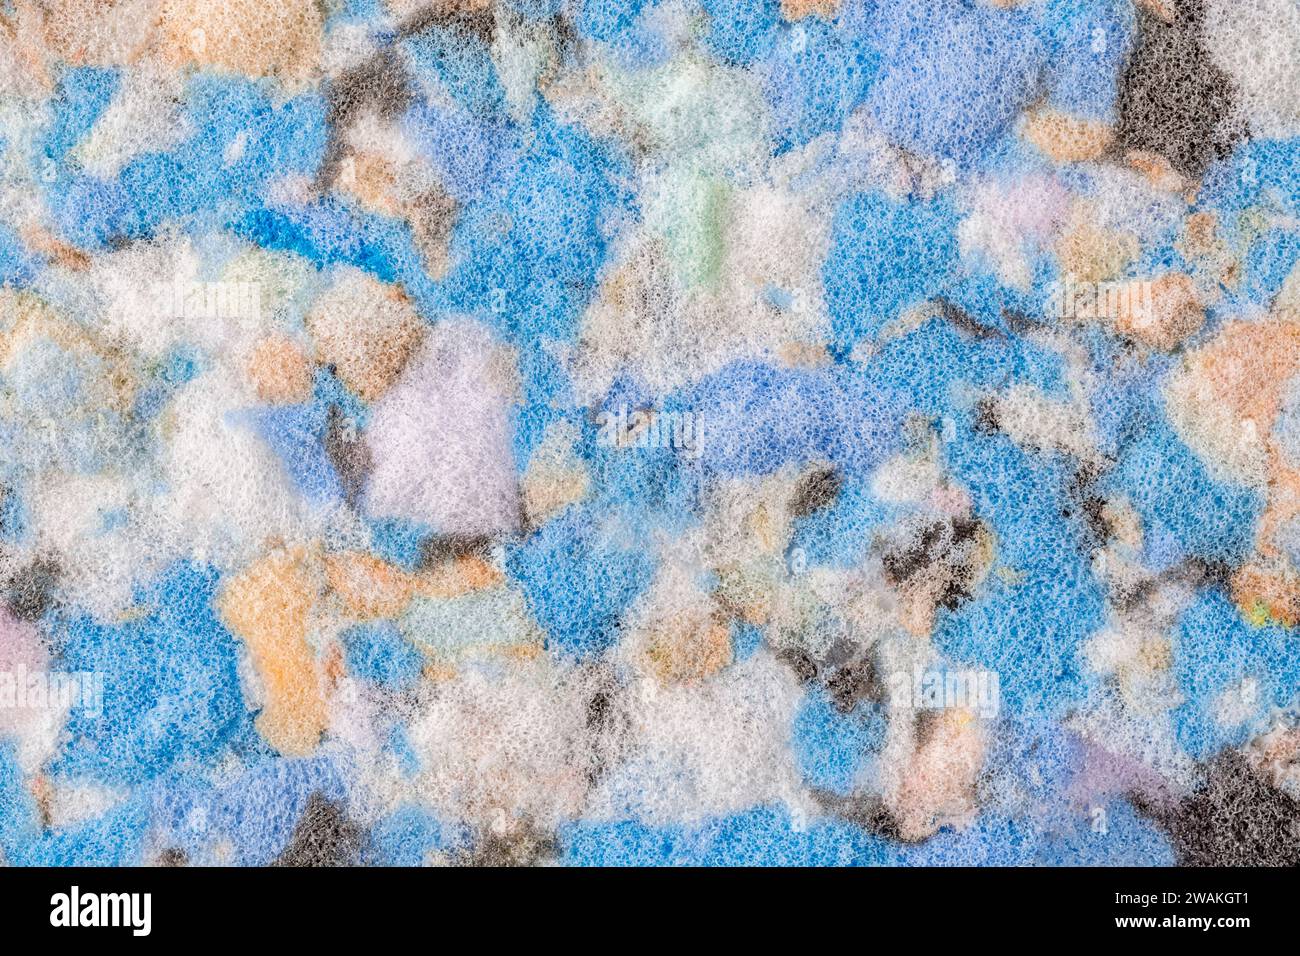 Close-up of high density foam rubber used in upholstery. Also for confusion, mental health illness, the mind, shattered dreams, lack of clarity. Stock Photo